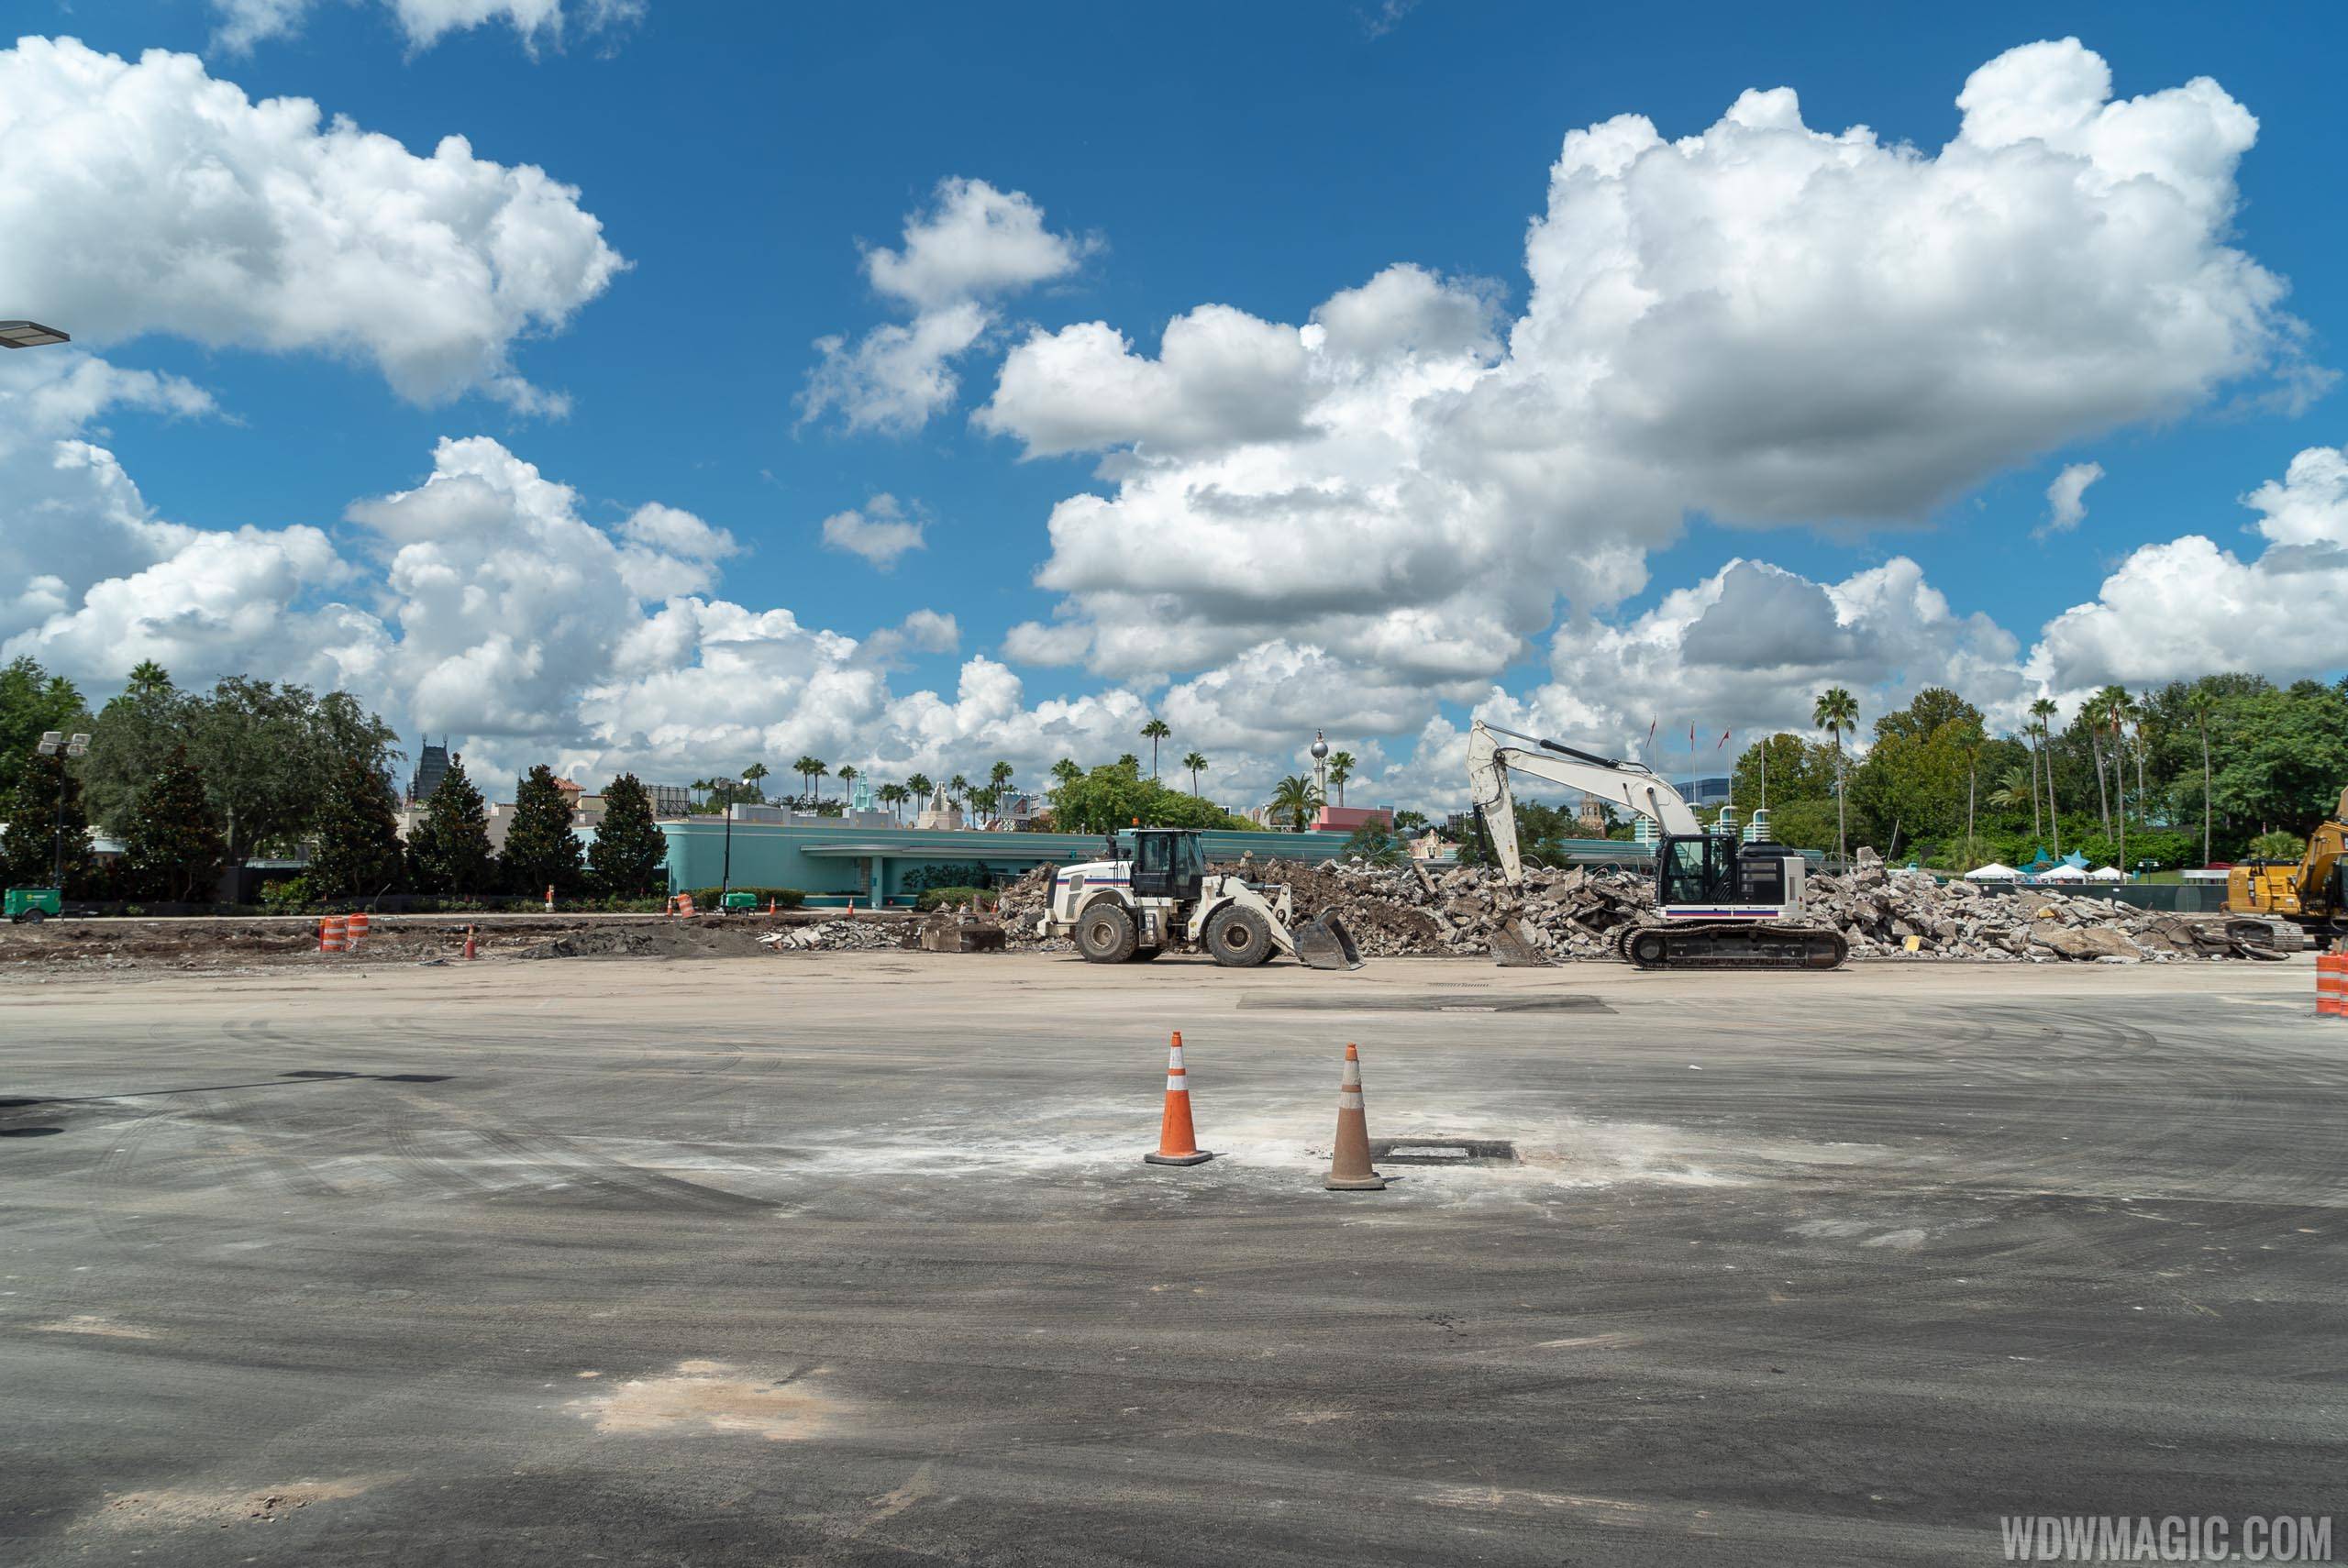 PHOTOS - A look at the former bus stop demolition and main entrance work at Disney's Hollywood Studios